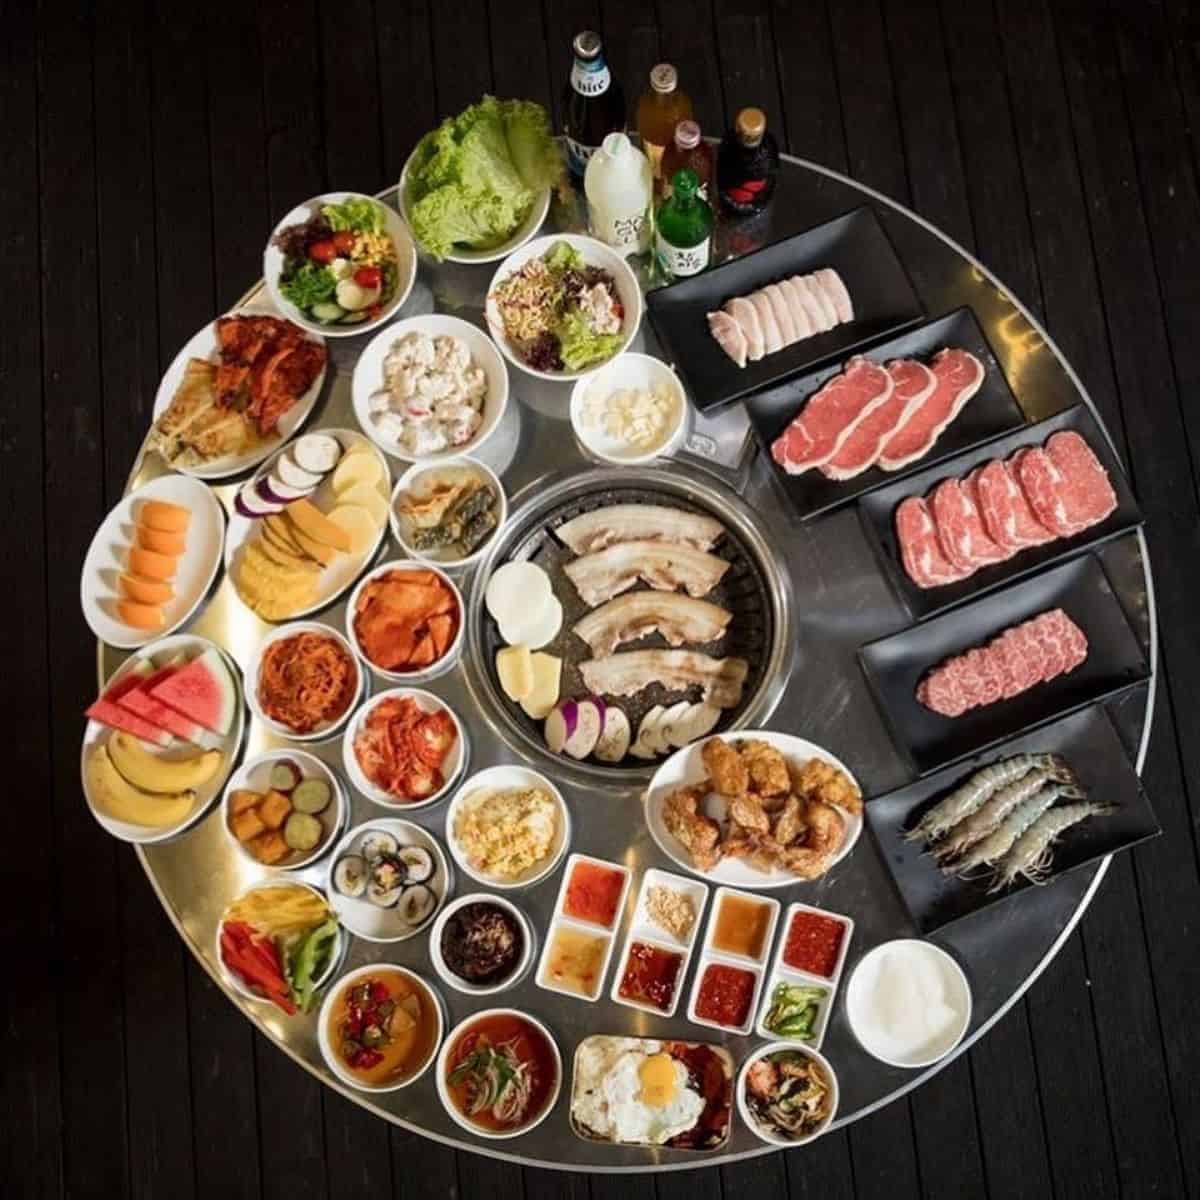 A table different meats and side dishes for Korean BBQ